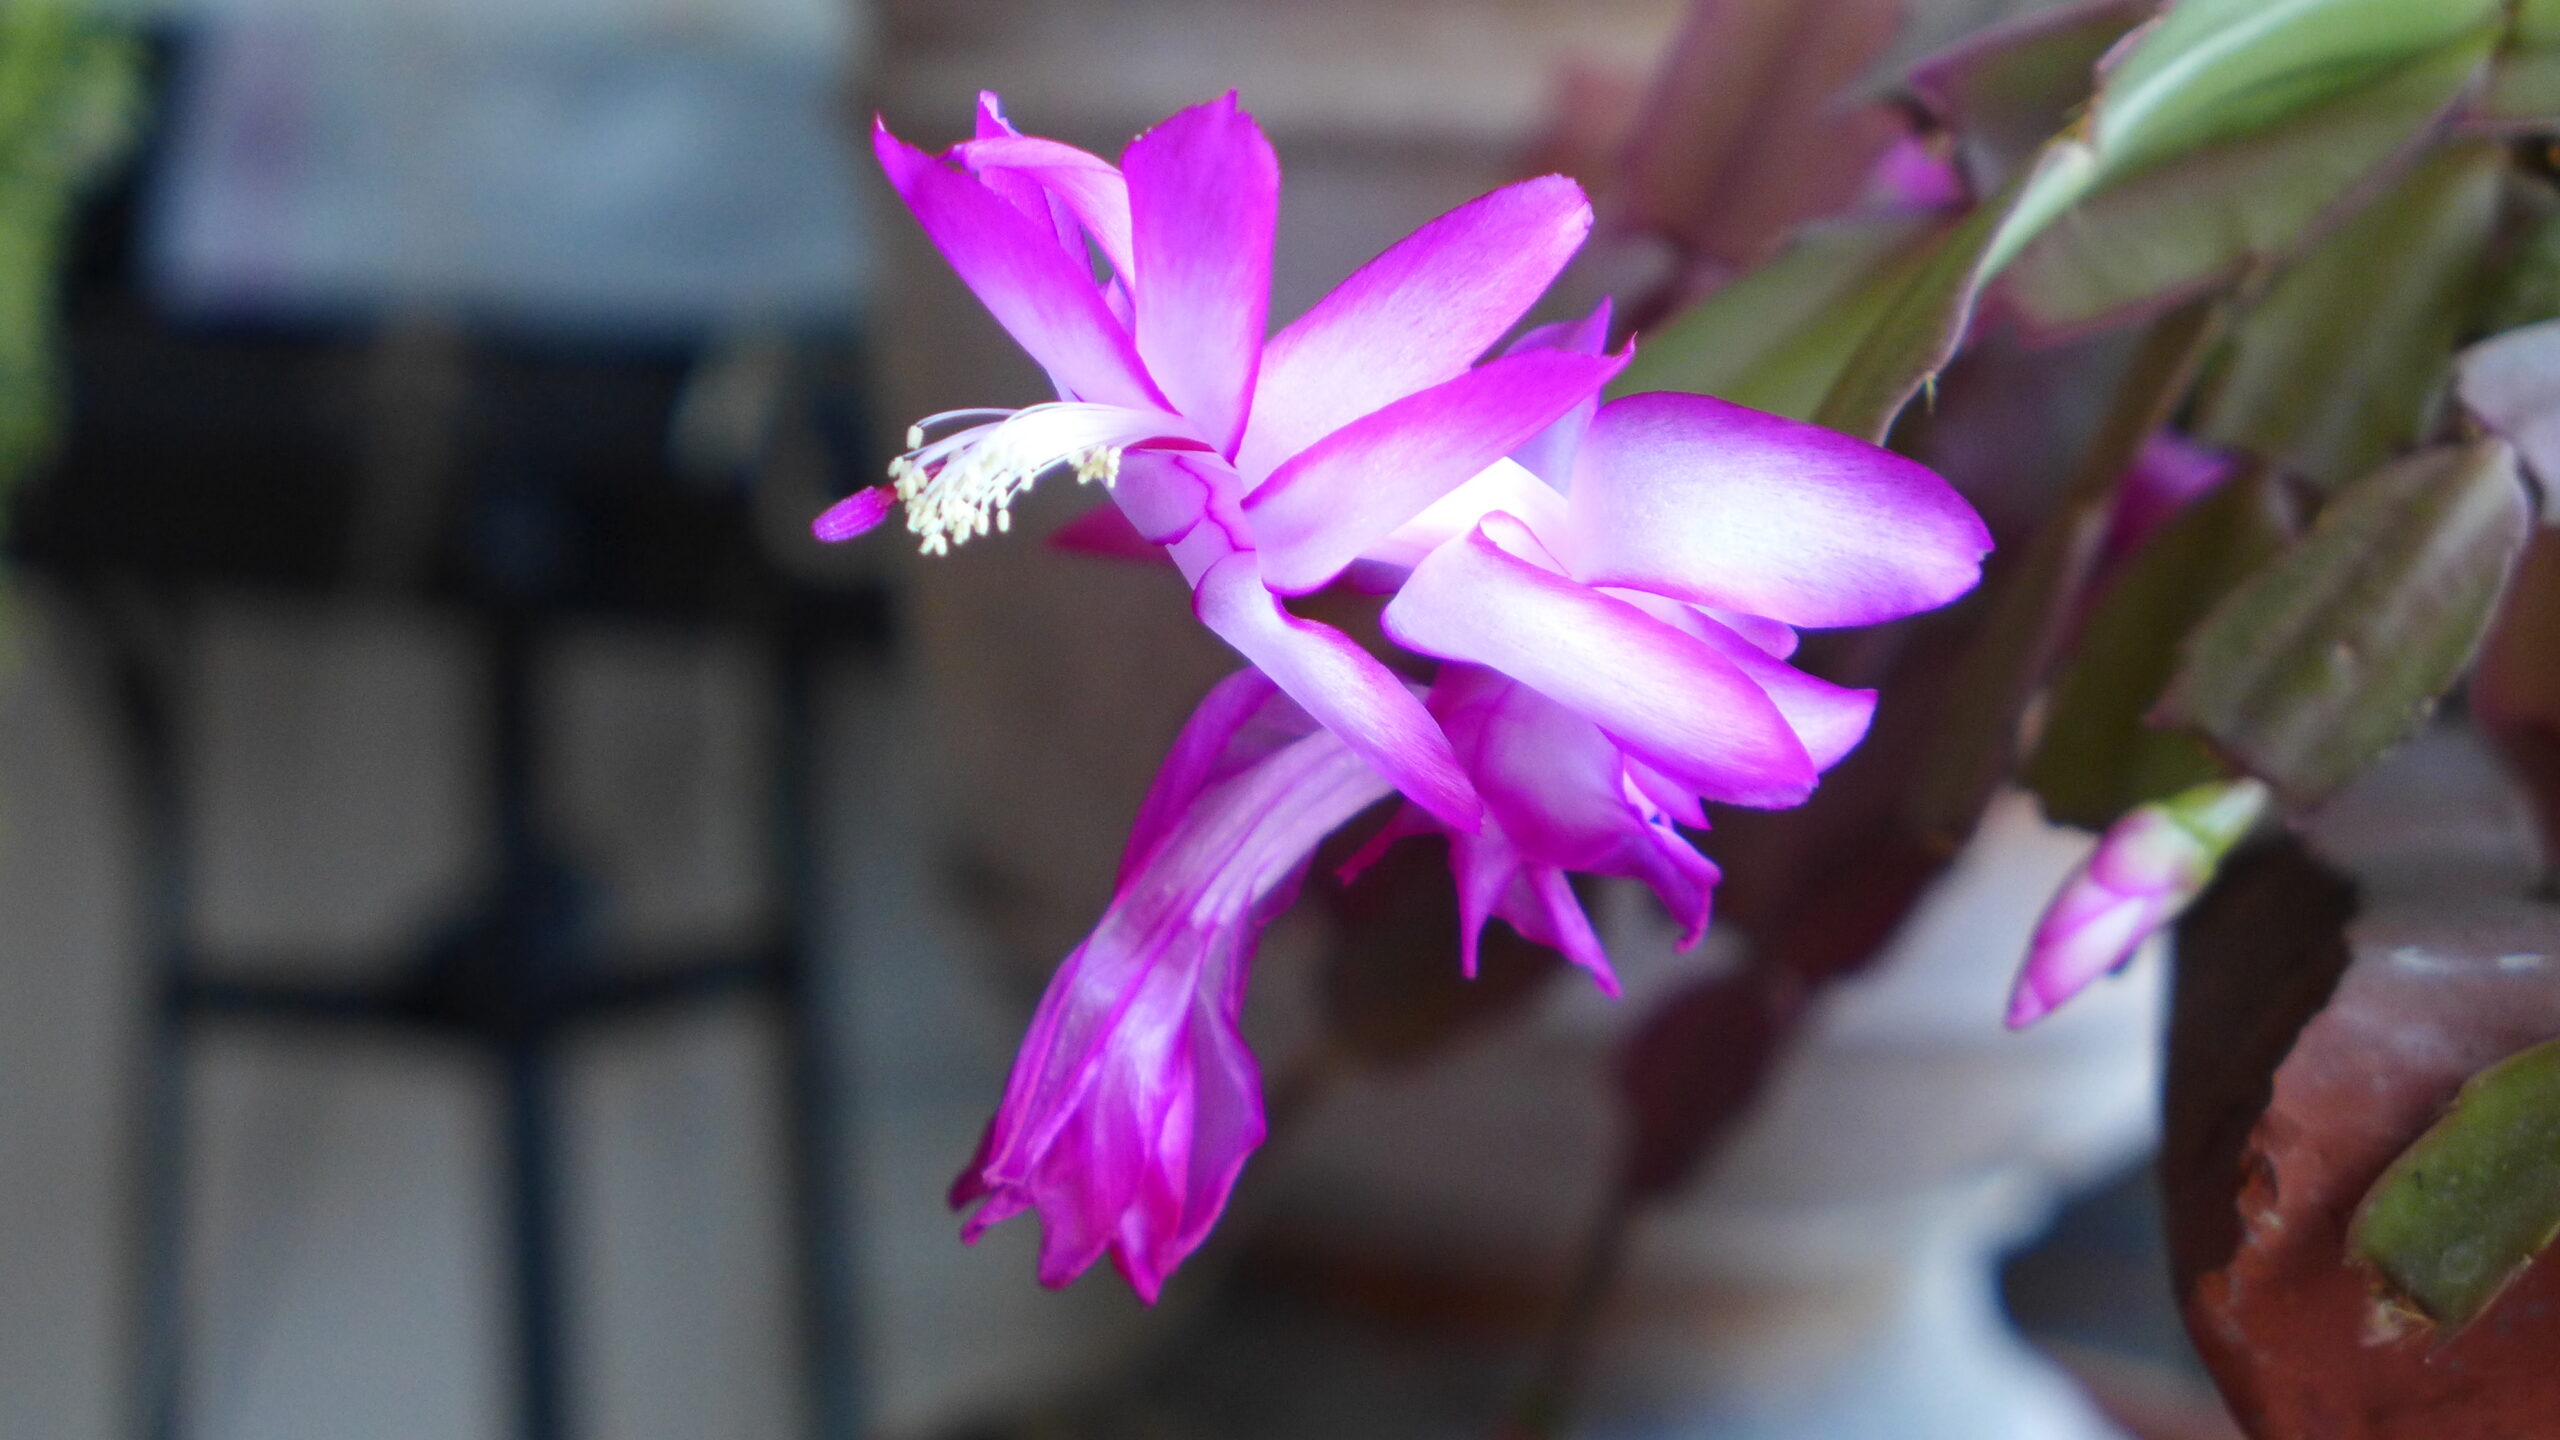 The holiday cacti flowers are quite intricate. With several flower petals the flower itself can be several inches long. The violet in this specimen is a bit more striking than on the more common pink varieties. ANDREW MESSINGER